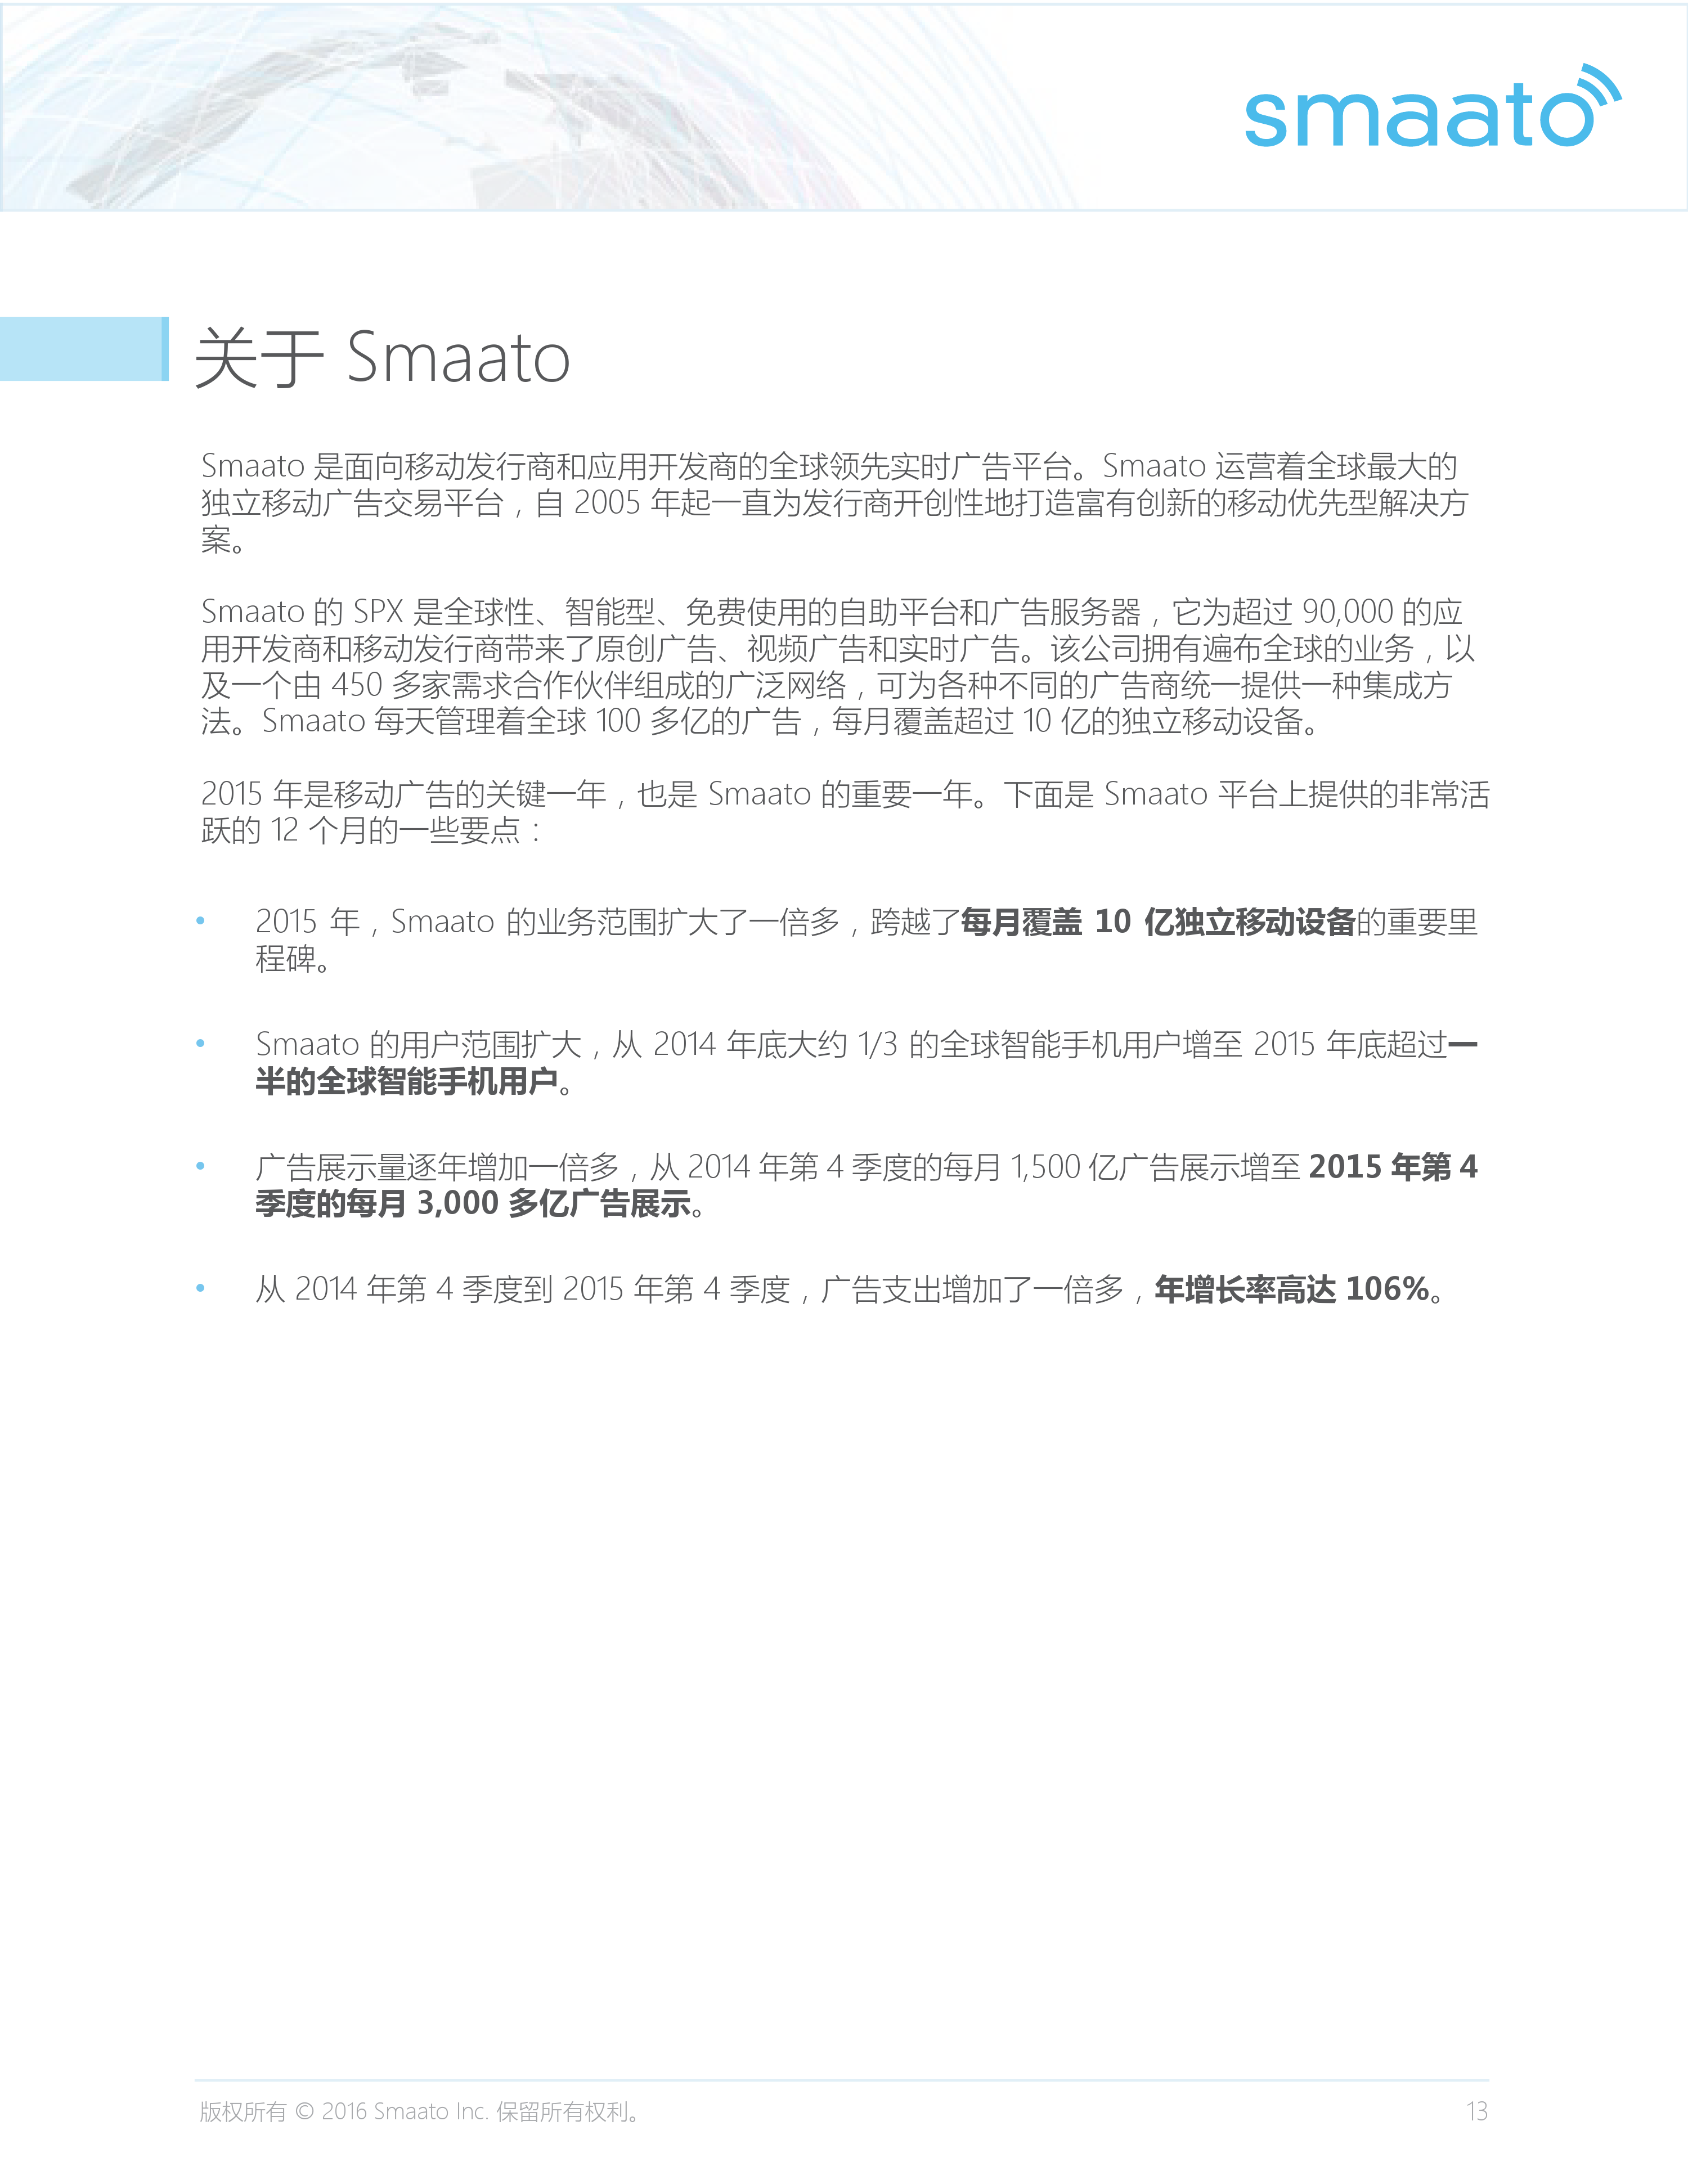 Smaato_Global_Trends_in_Mobile_Advertising_Report_Q4_2015_CN_000011